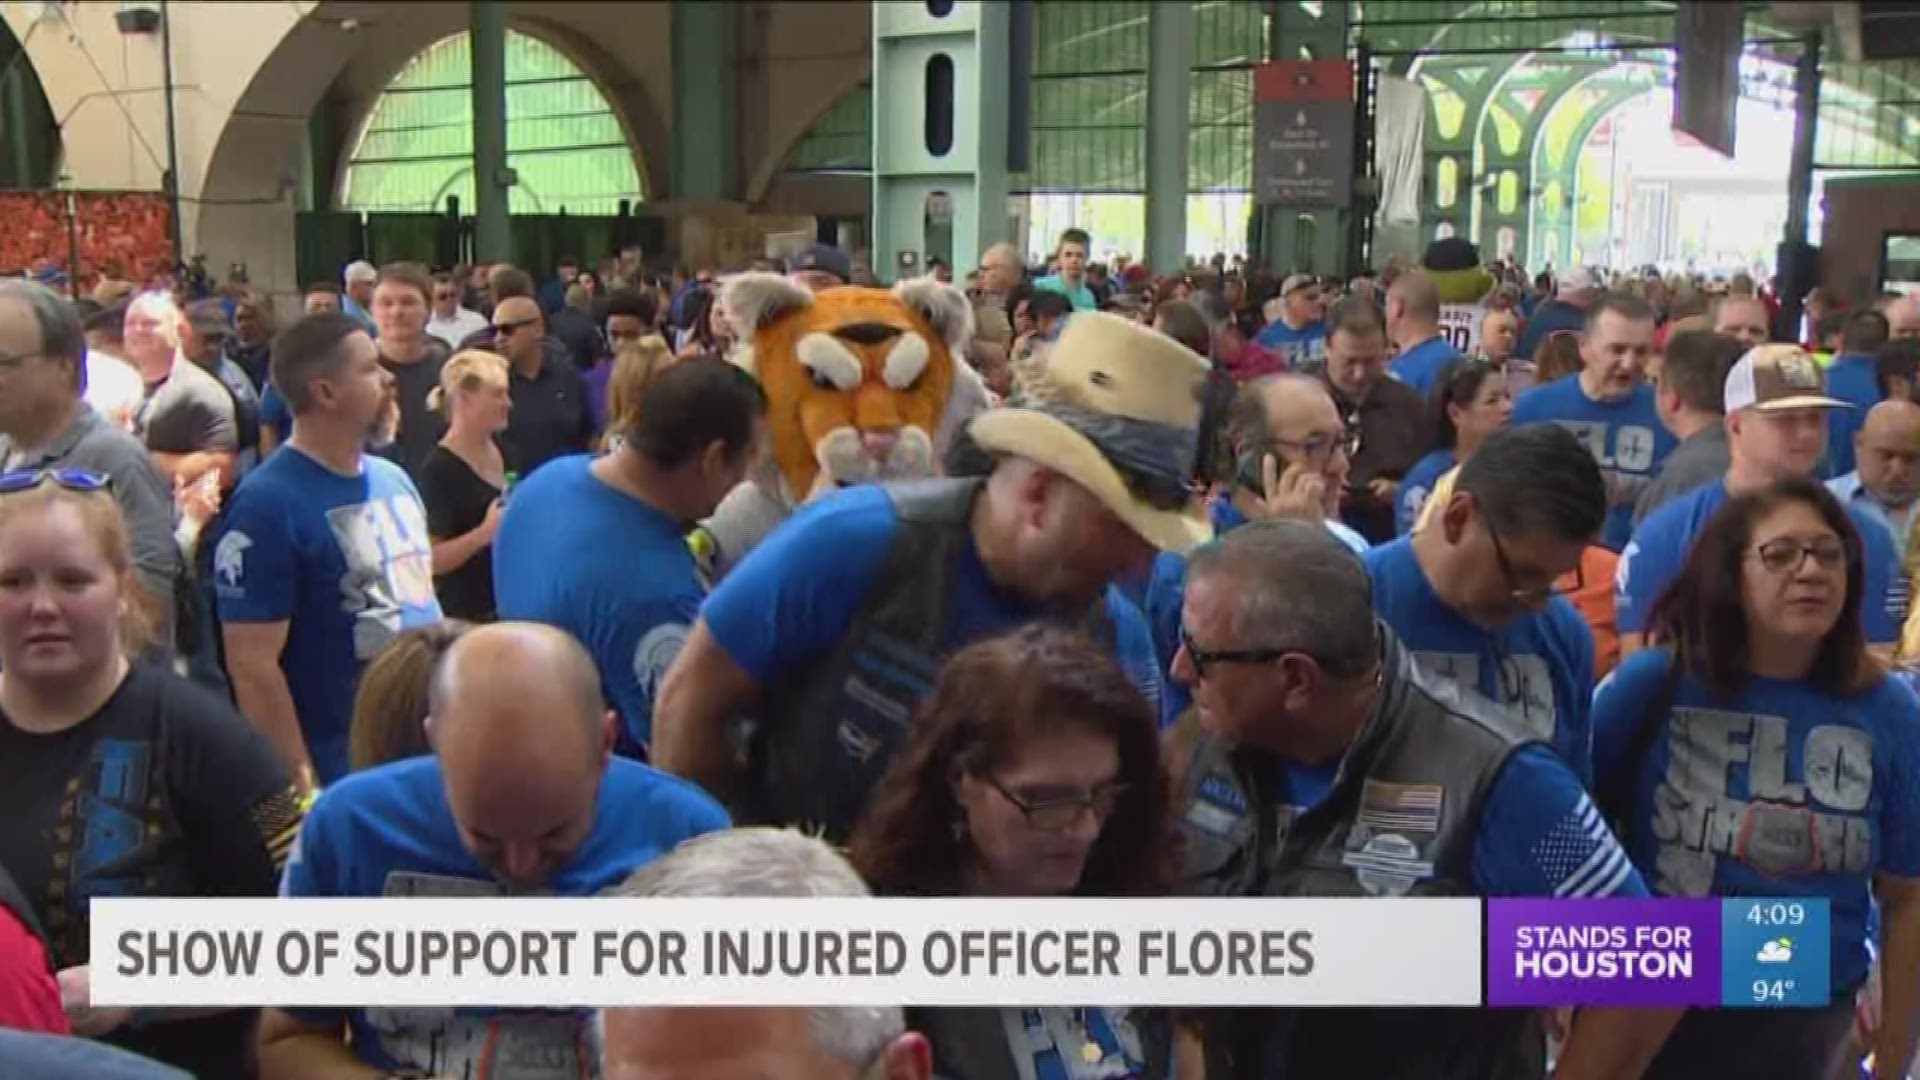 Hundreds of friends, family members and fellow law enforcement officers attended a benefit Thursday for injured HPD Senior Officer Jerry Flores. The Astros Foundation teamed up with the Thin Blue Line Motorcycle Club for the benefit at Minute Maid Park.